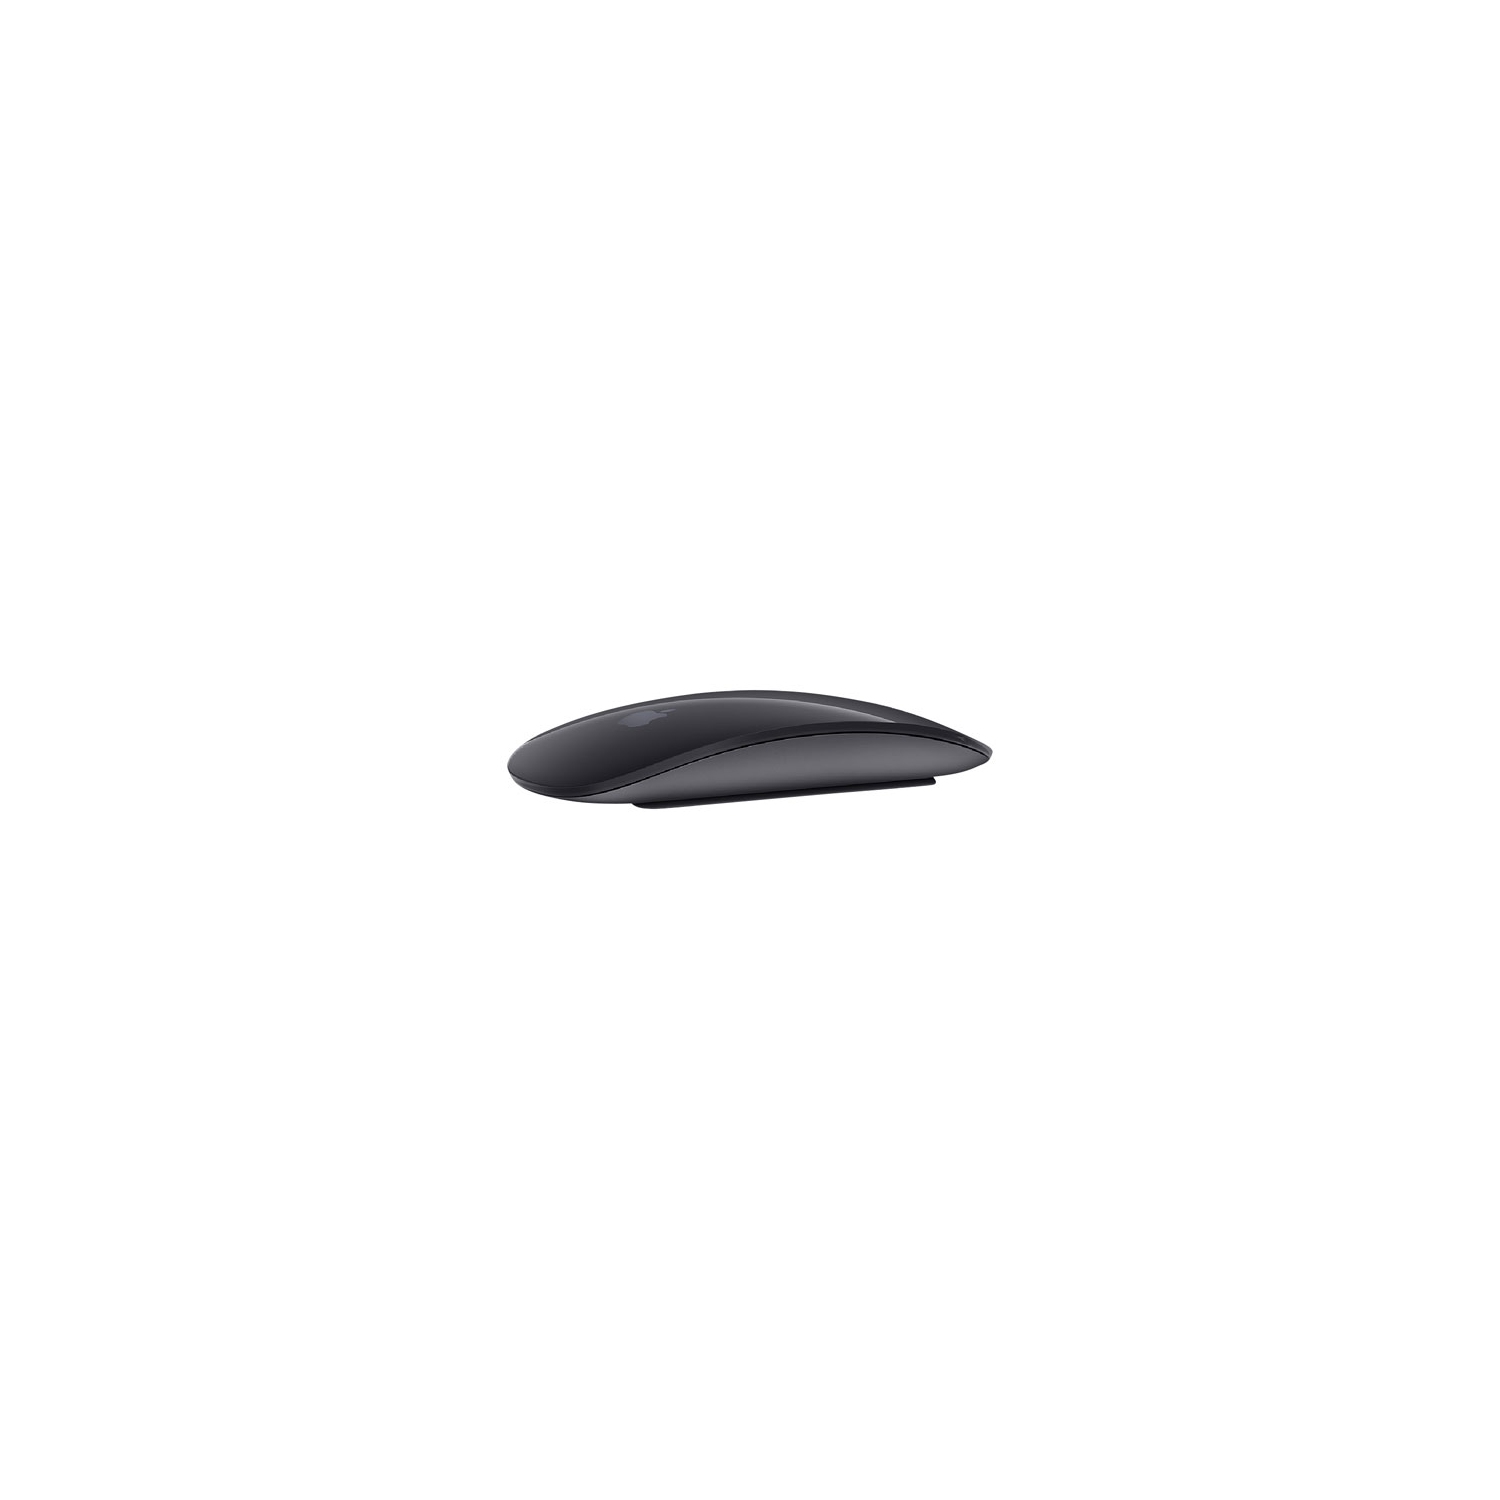 Apple Magic Mouse 2 - Space Grey - Refurbished